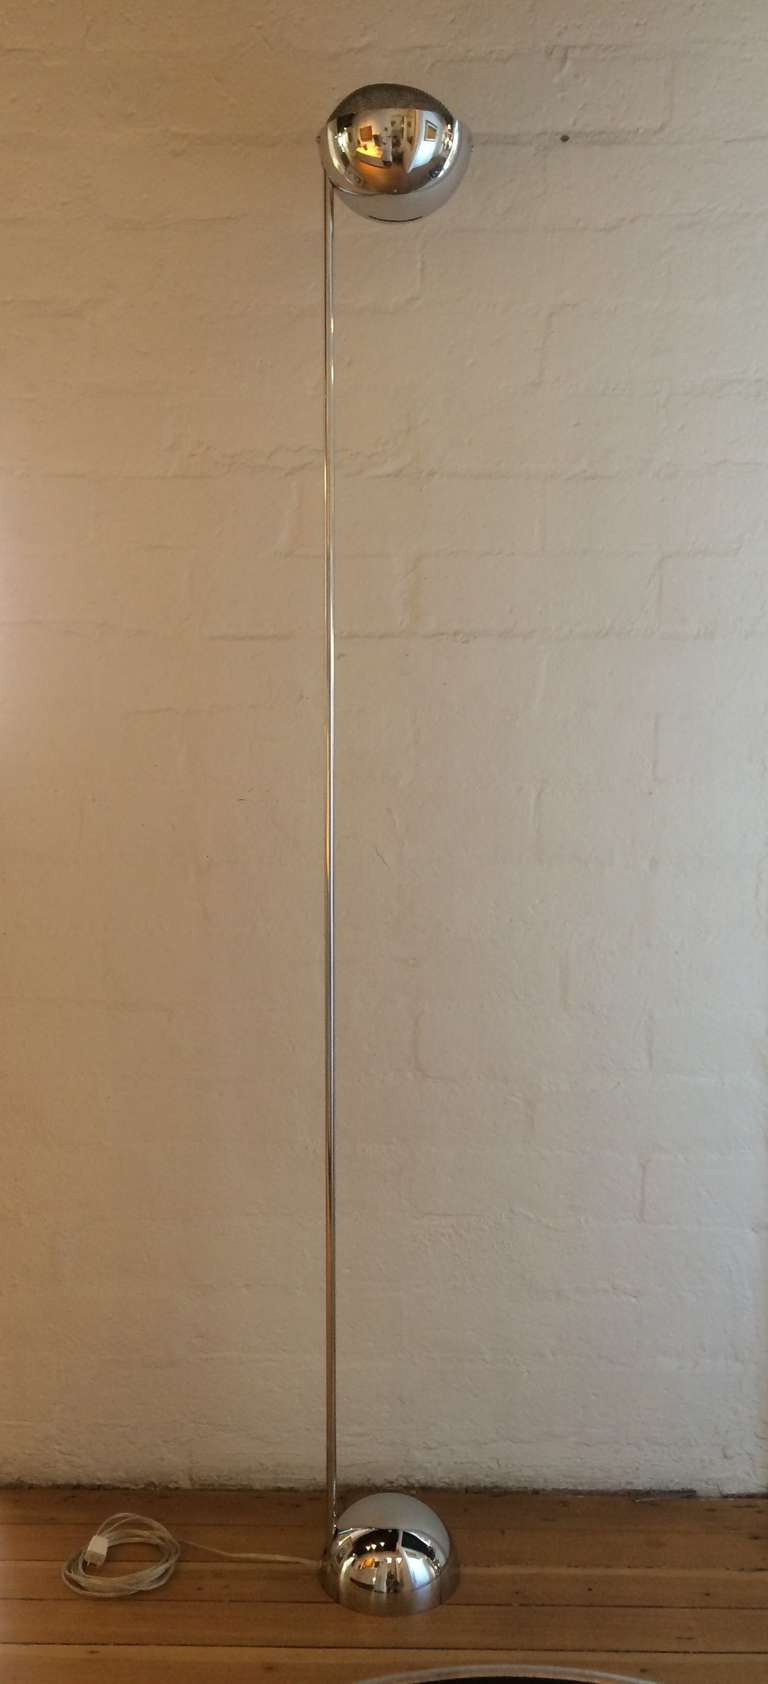 A polished chrome floor lamp designed by George Kovacs circa 1970s.
Newly rewired.